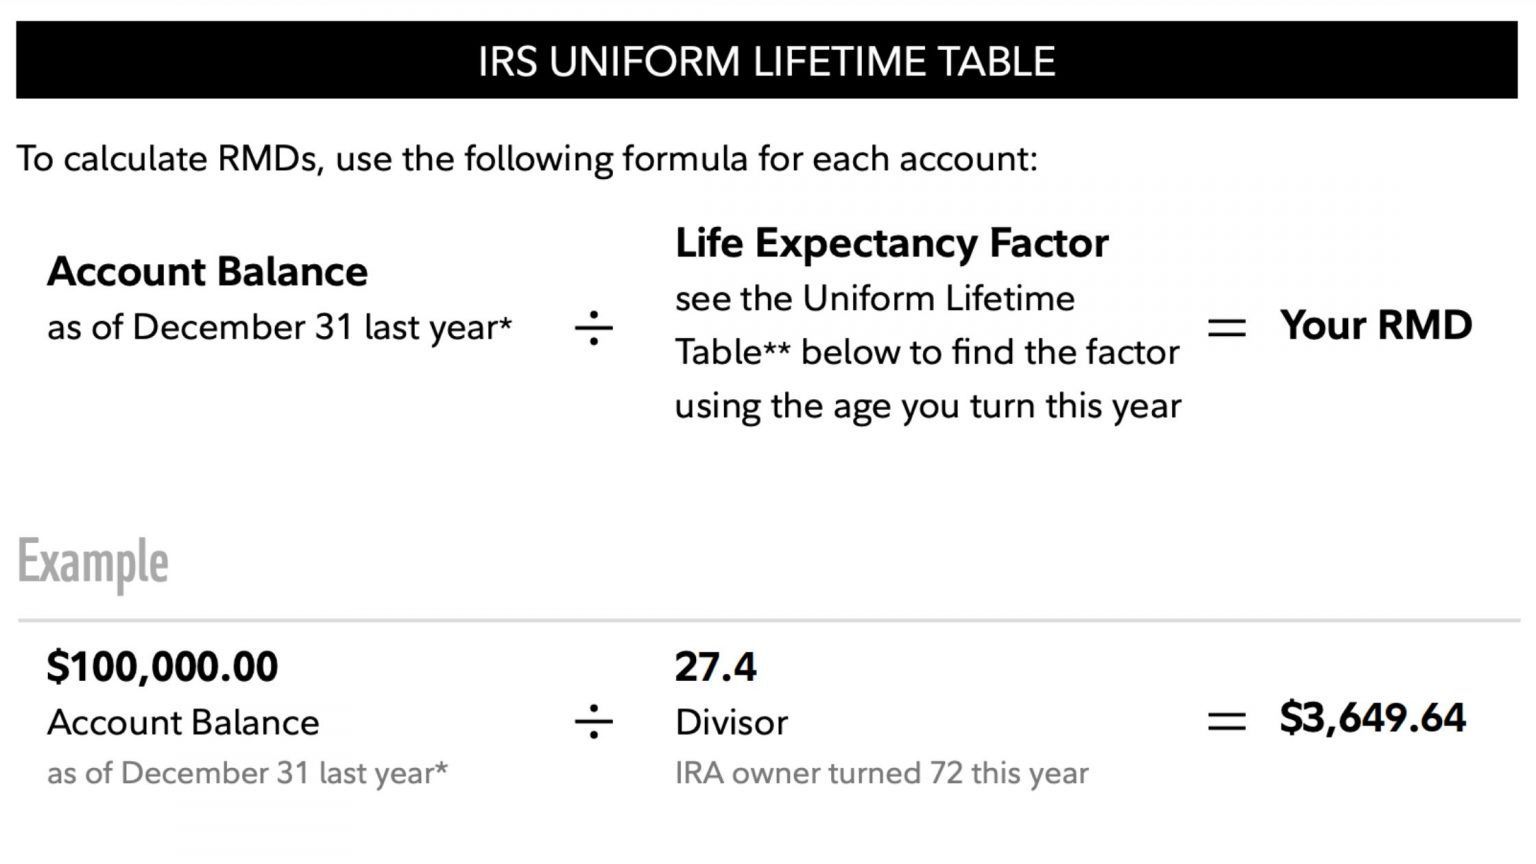 a picture of an irs uniform lifetime table